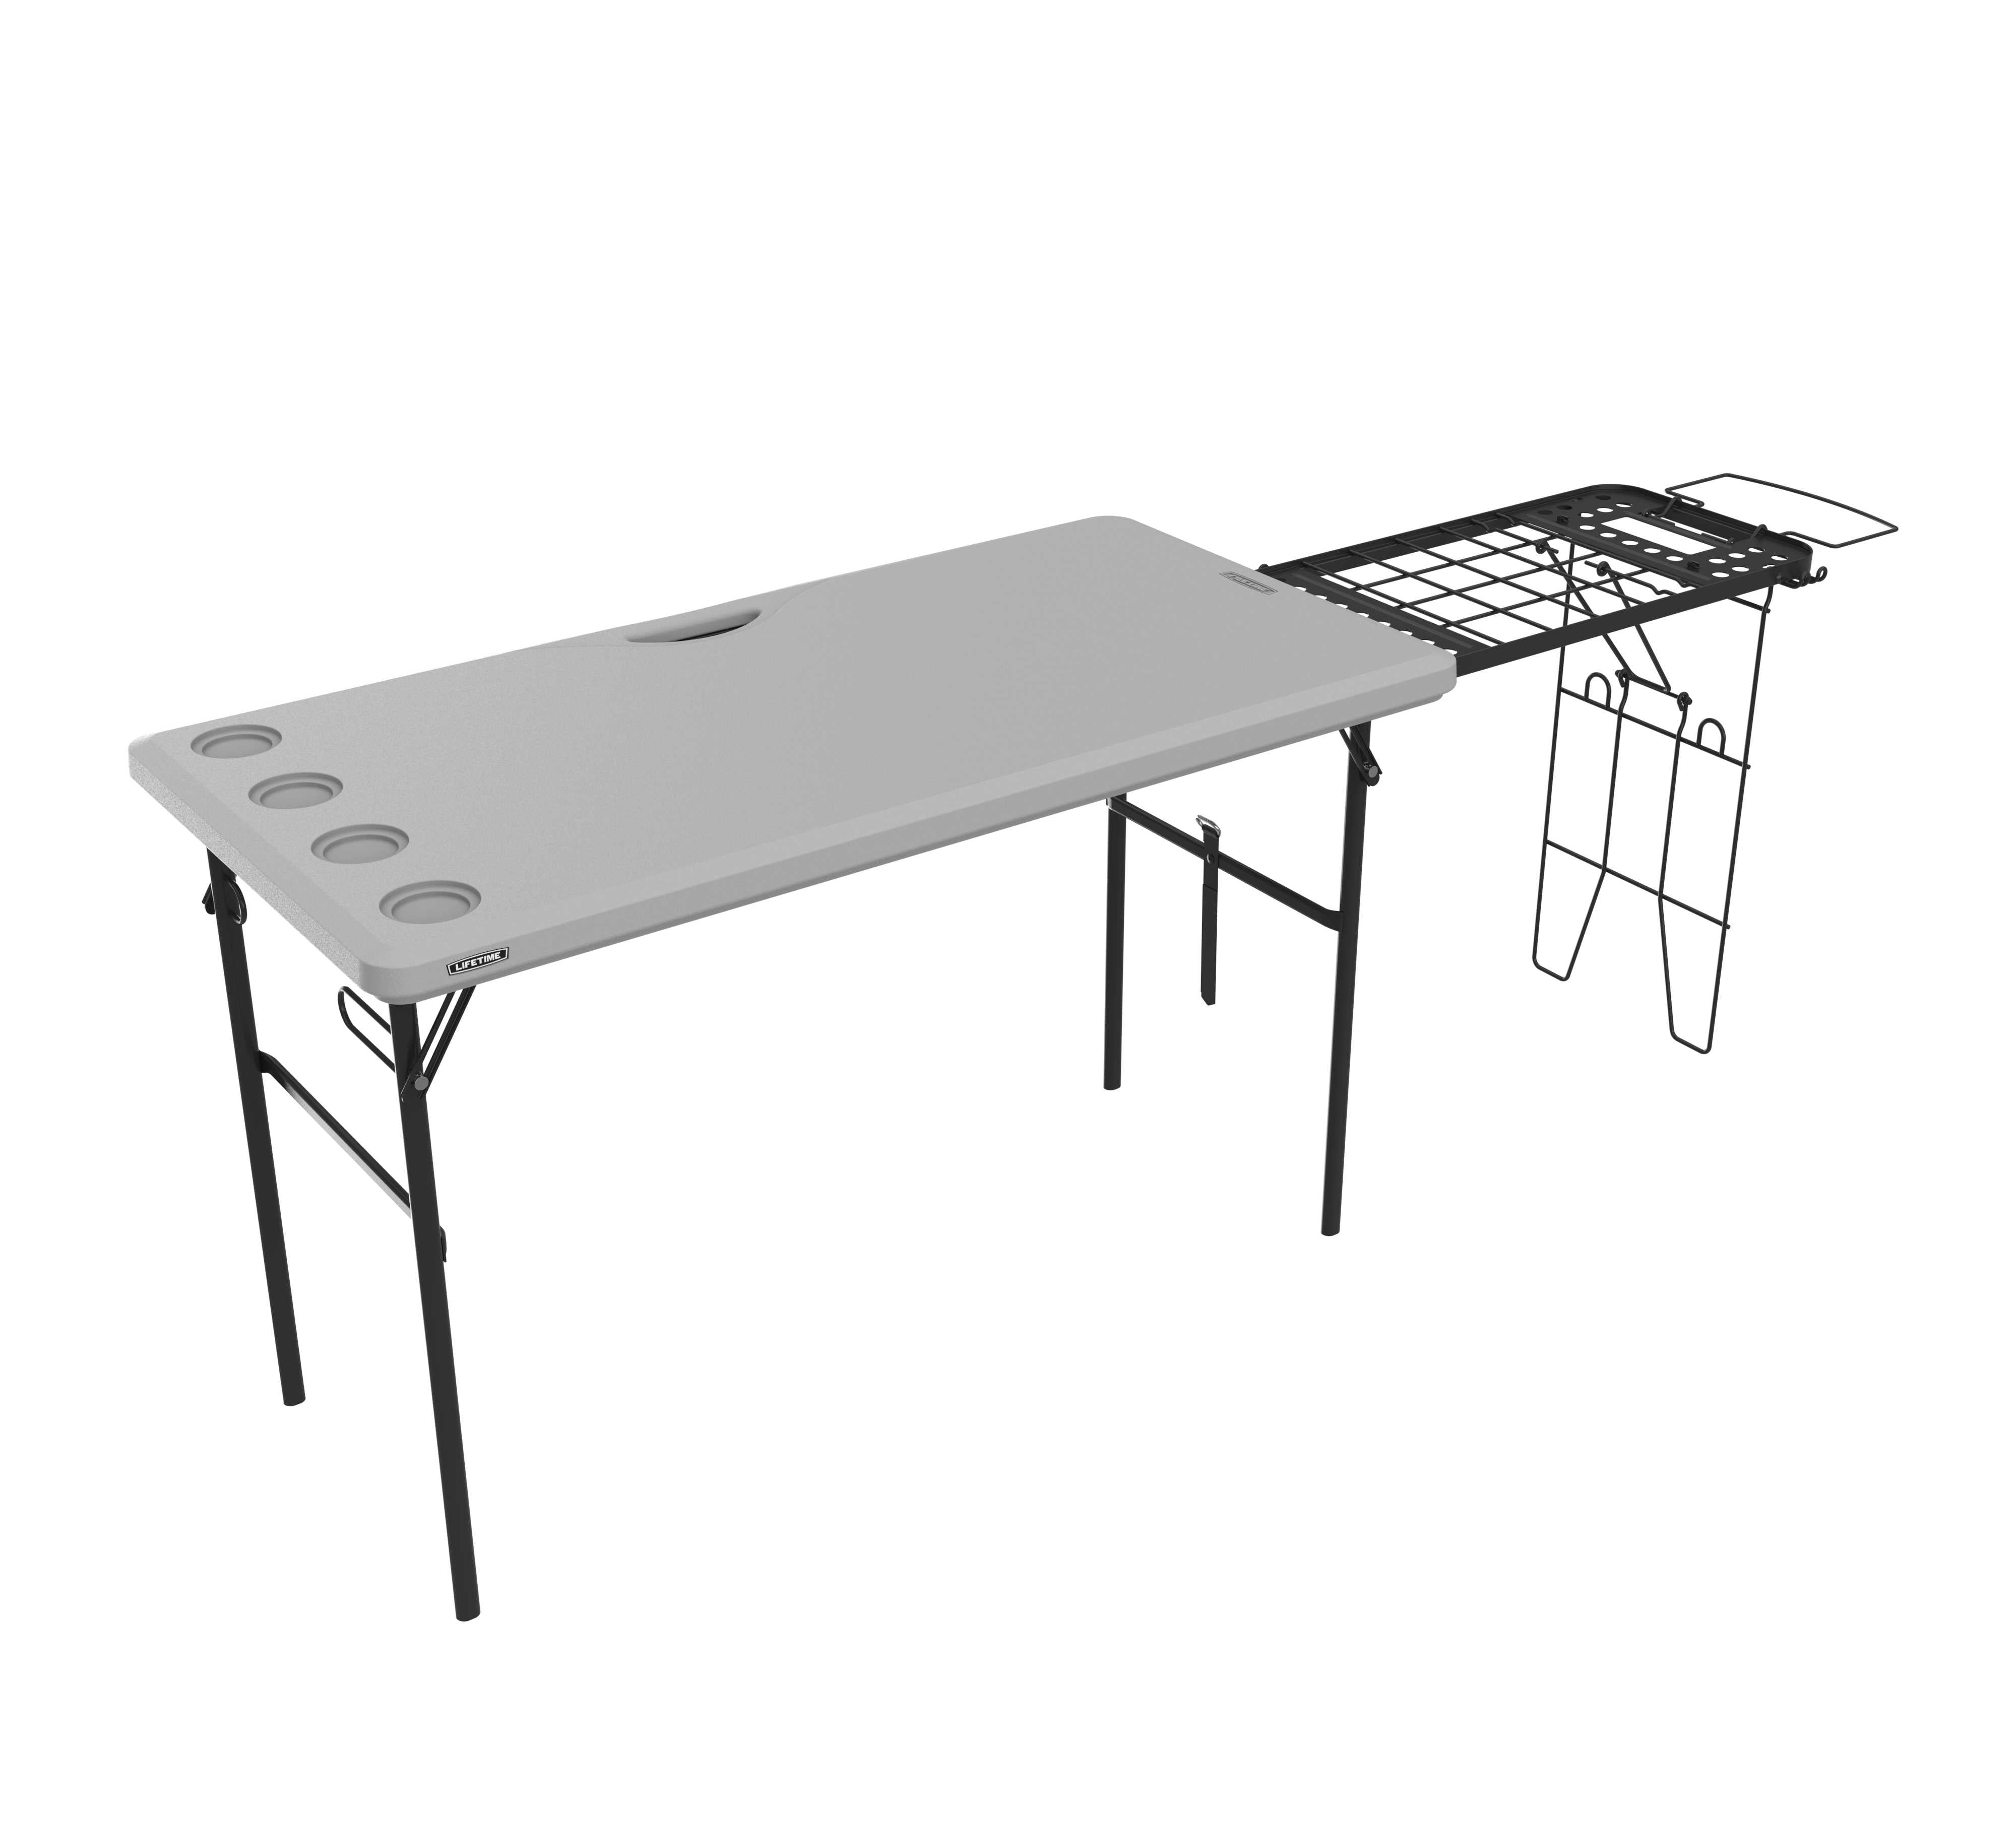 Compact Convenient Carry Case Included 4 Mesh Cup Holders Preferred Nation Folding Table Polyester with Metal Frame Black 